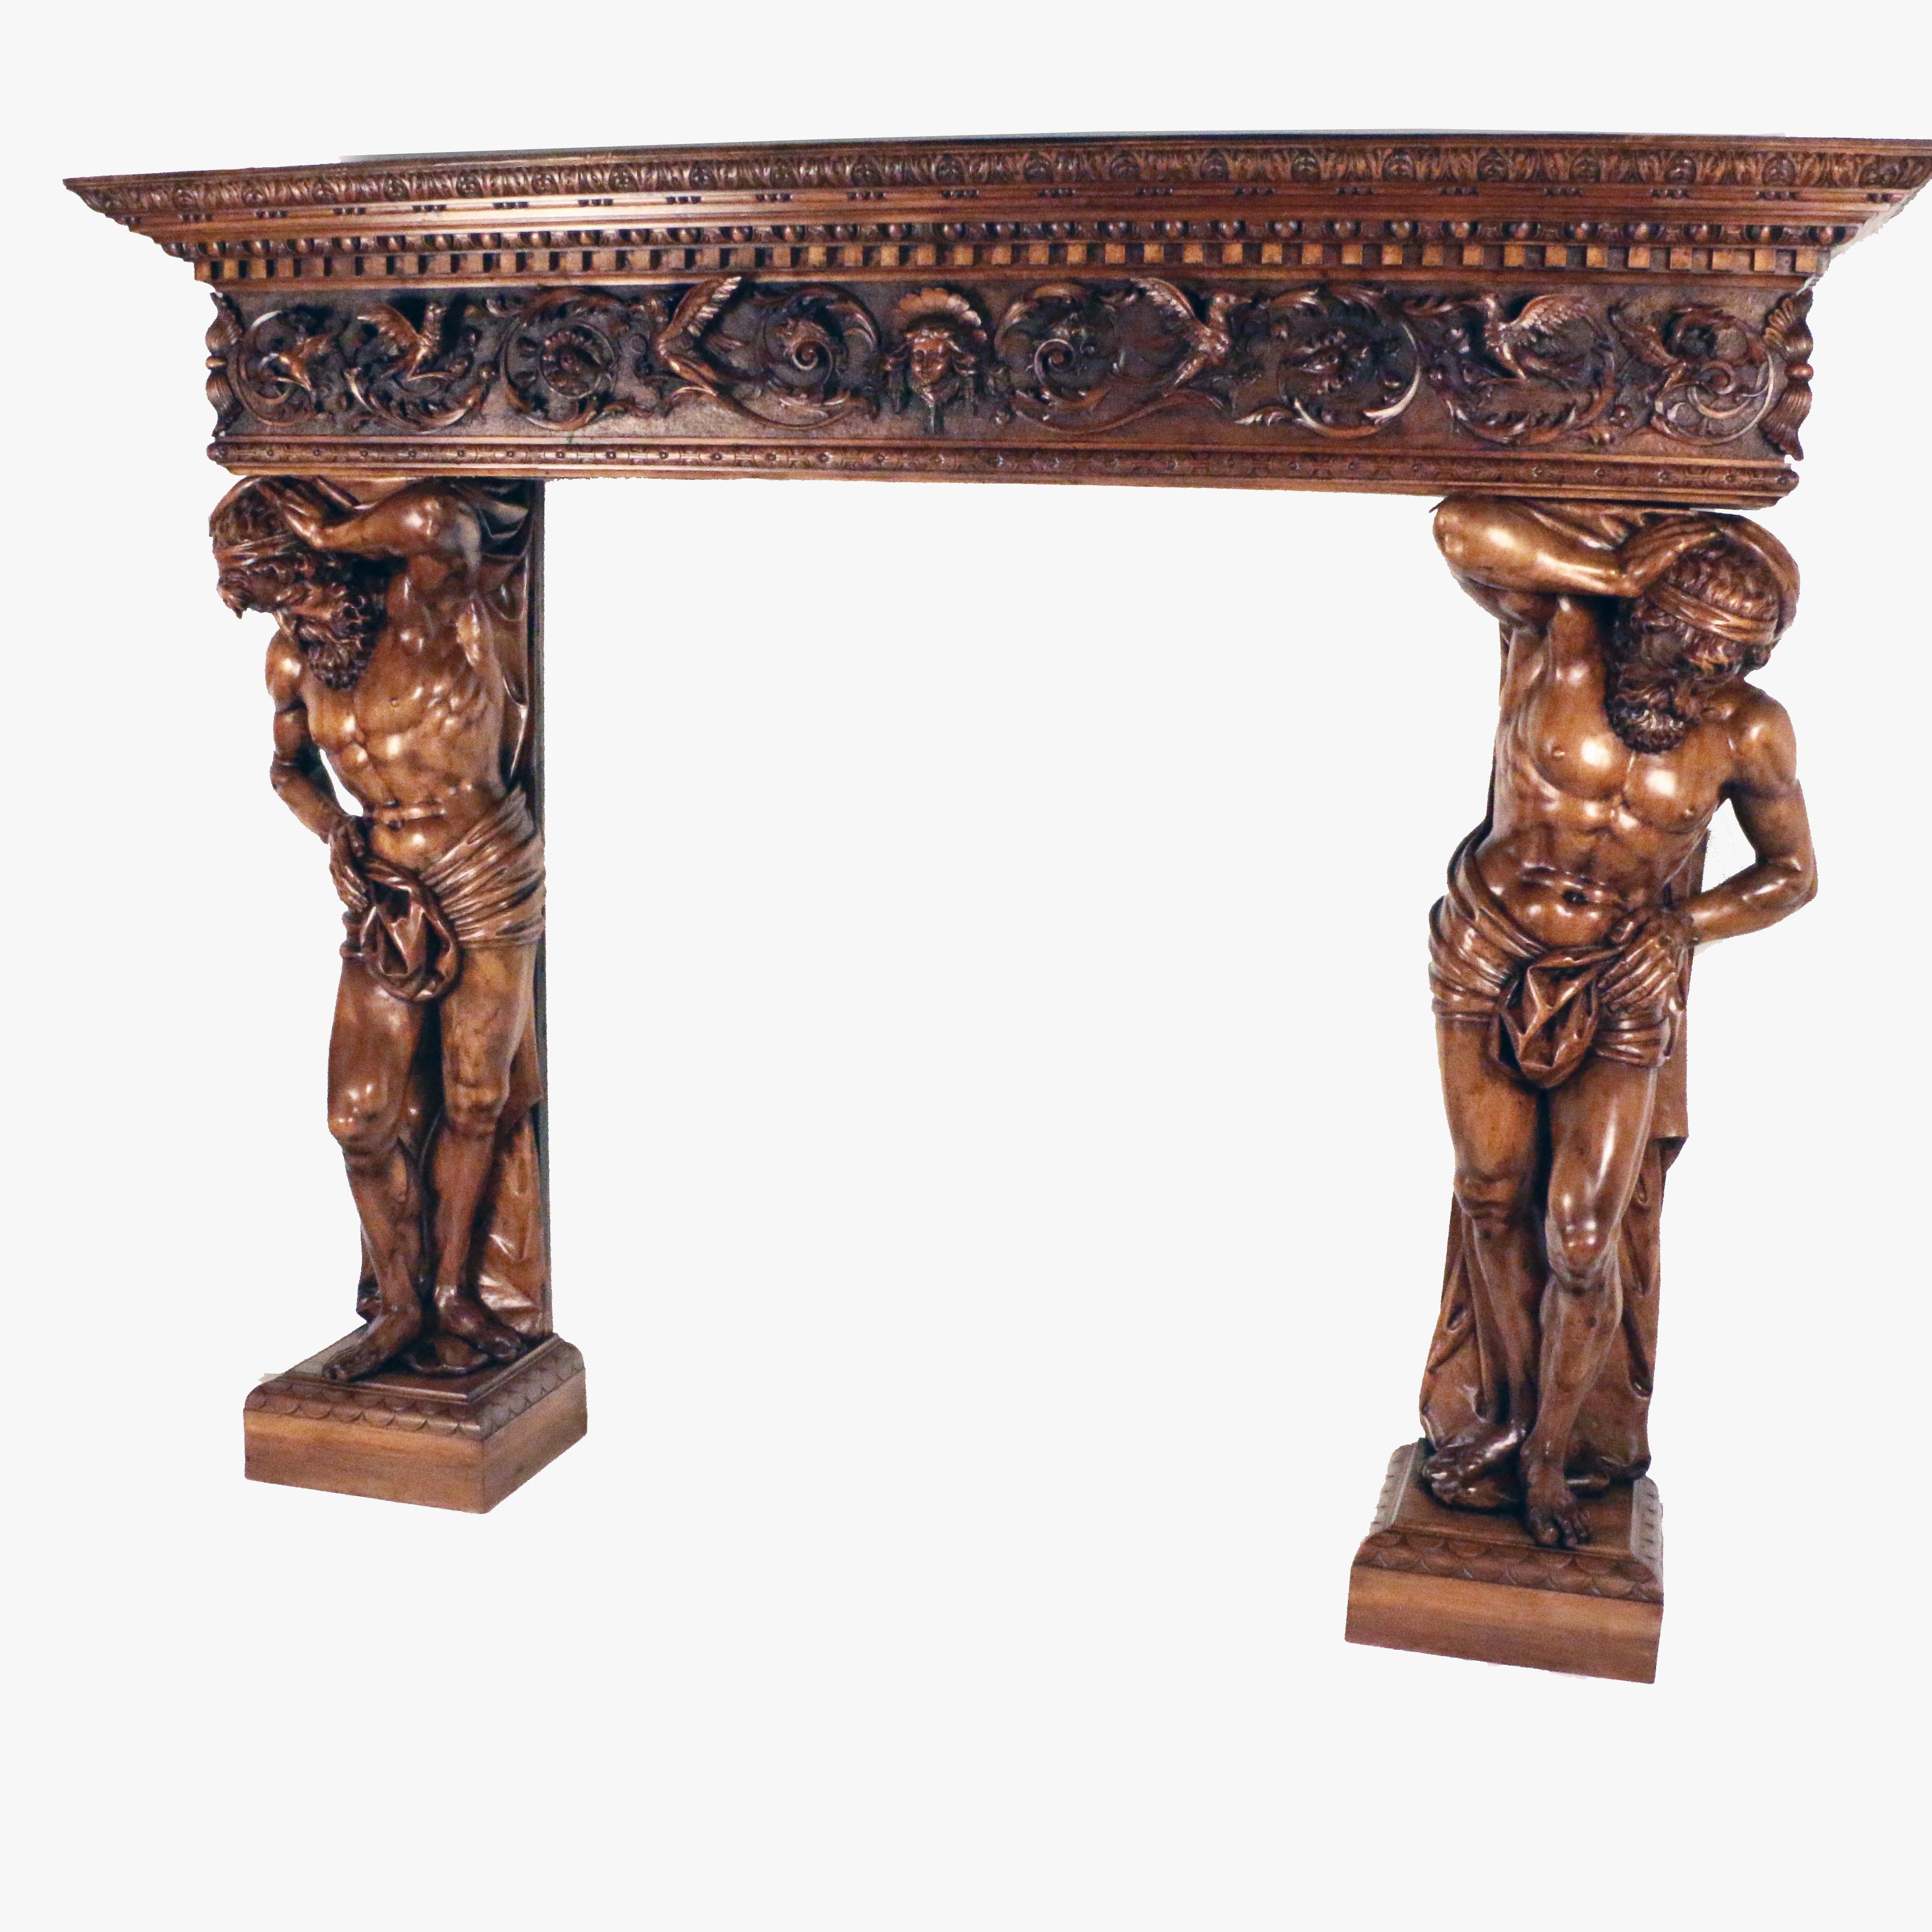 This extraordinary mantel is superbly carved, firstly with a simple dentil cornice; above a front panel, carved in high-relief with birds, scrolling leaves and tendrils. The jambs are carved as a pair of muscular Atlas-like supporters which are a